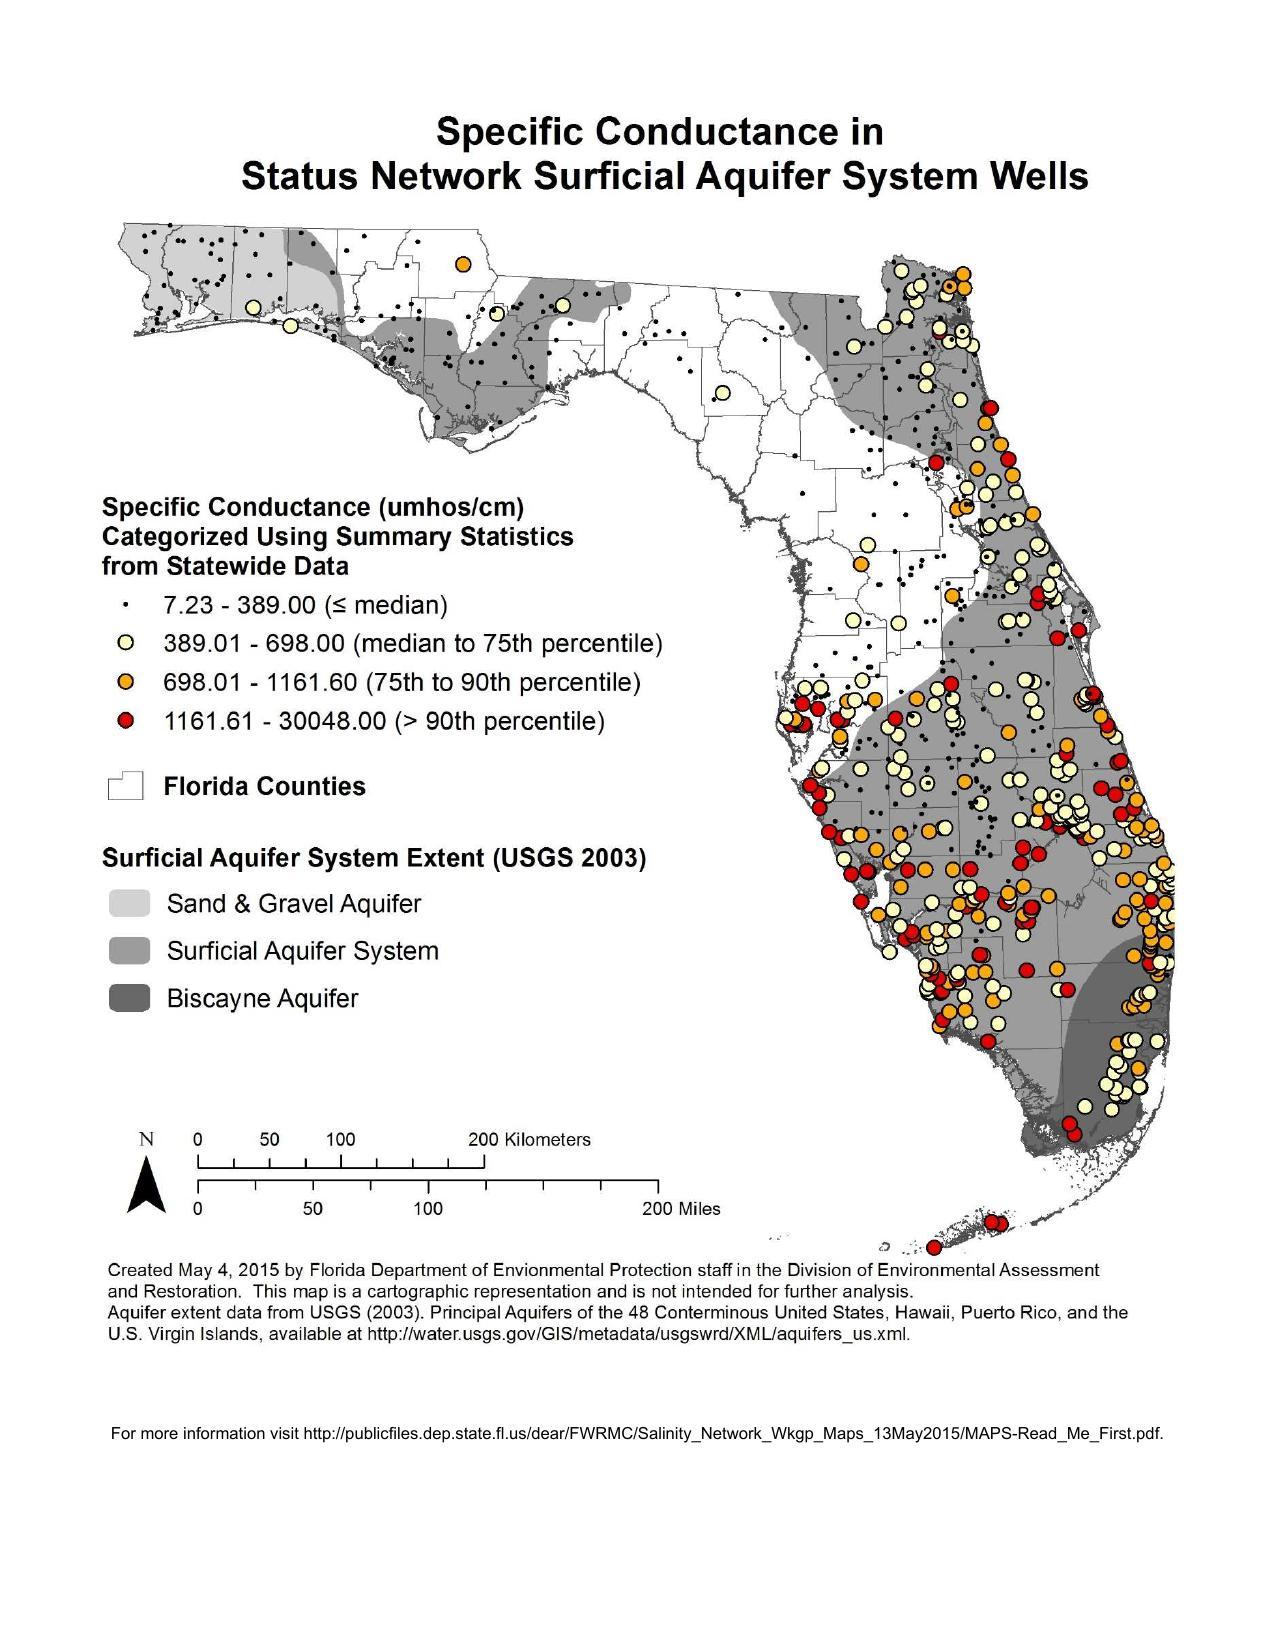 1275x1650 Specific Conductance in Status Network Surficial Aquifer System Wells, in Florida Well Salinity Study, by FL-DEP, 13 July 2015